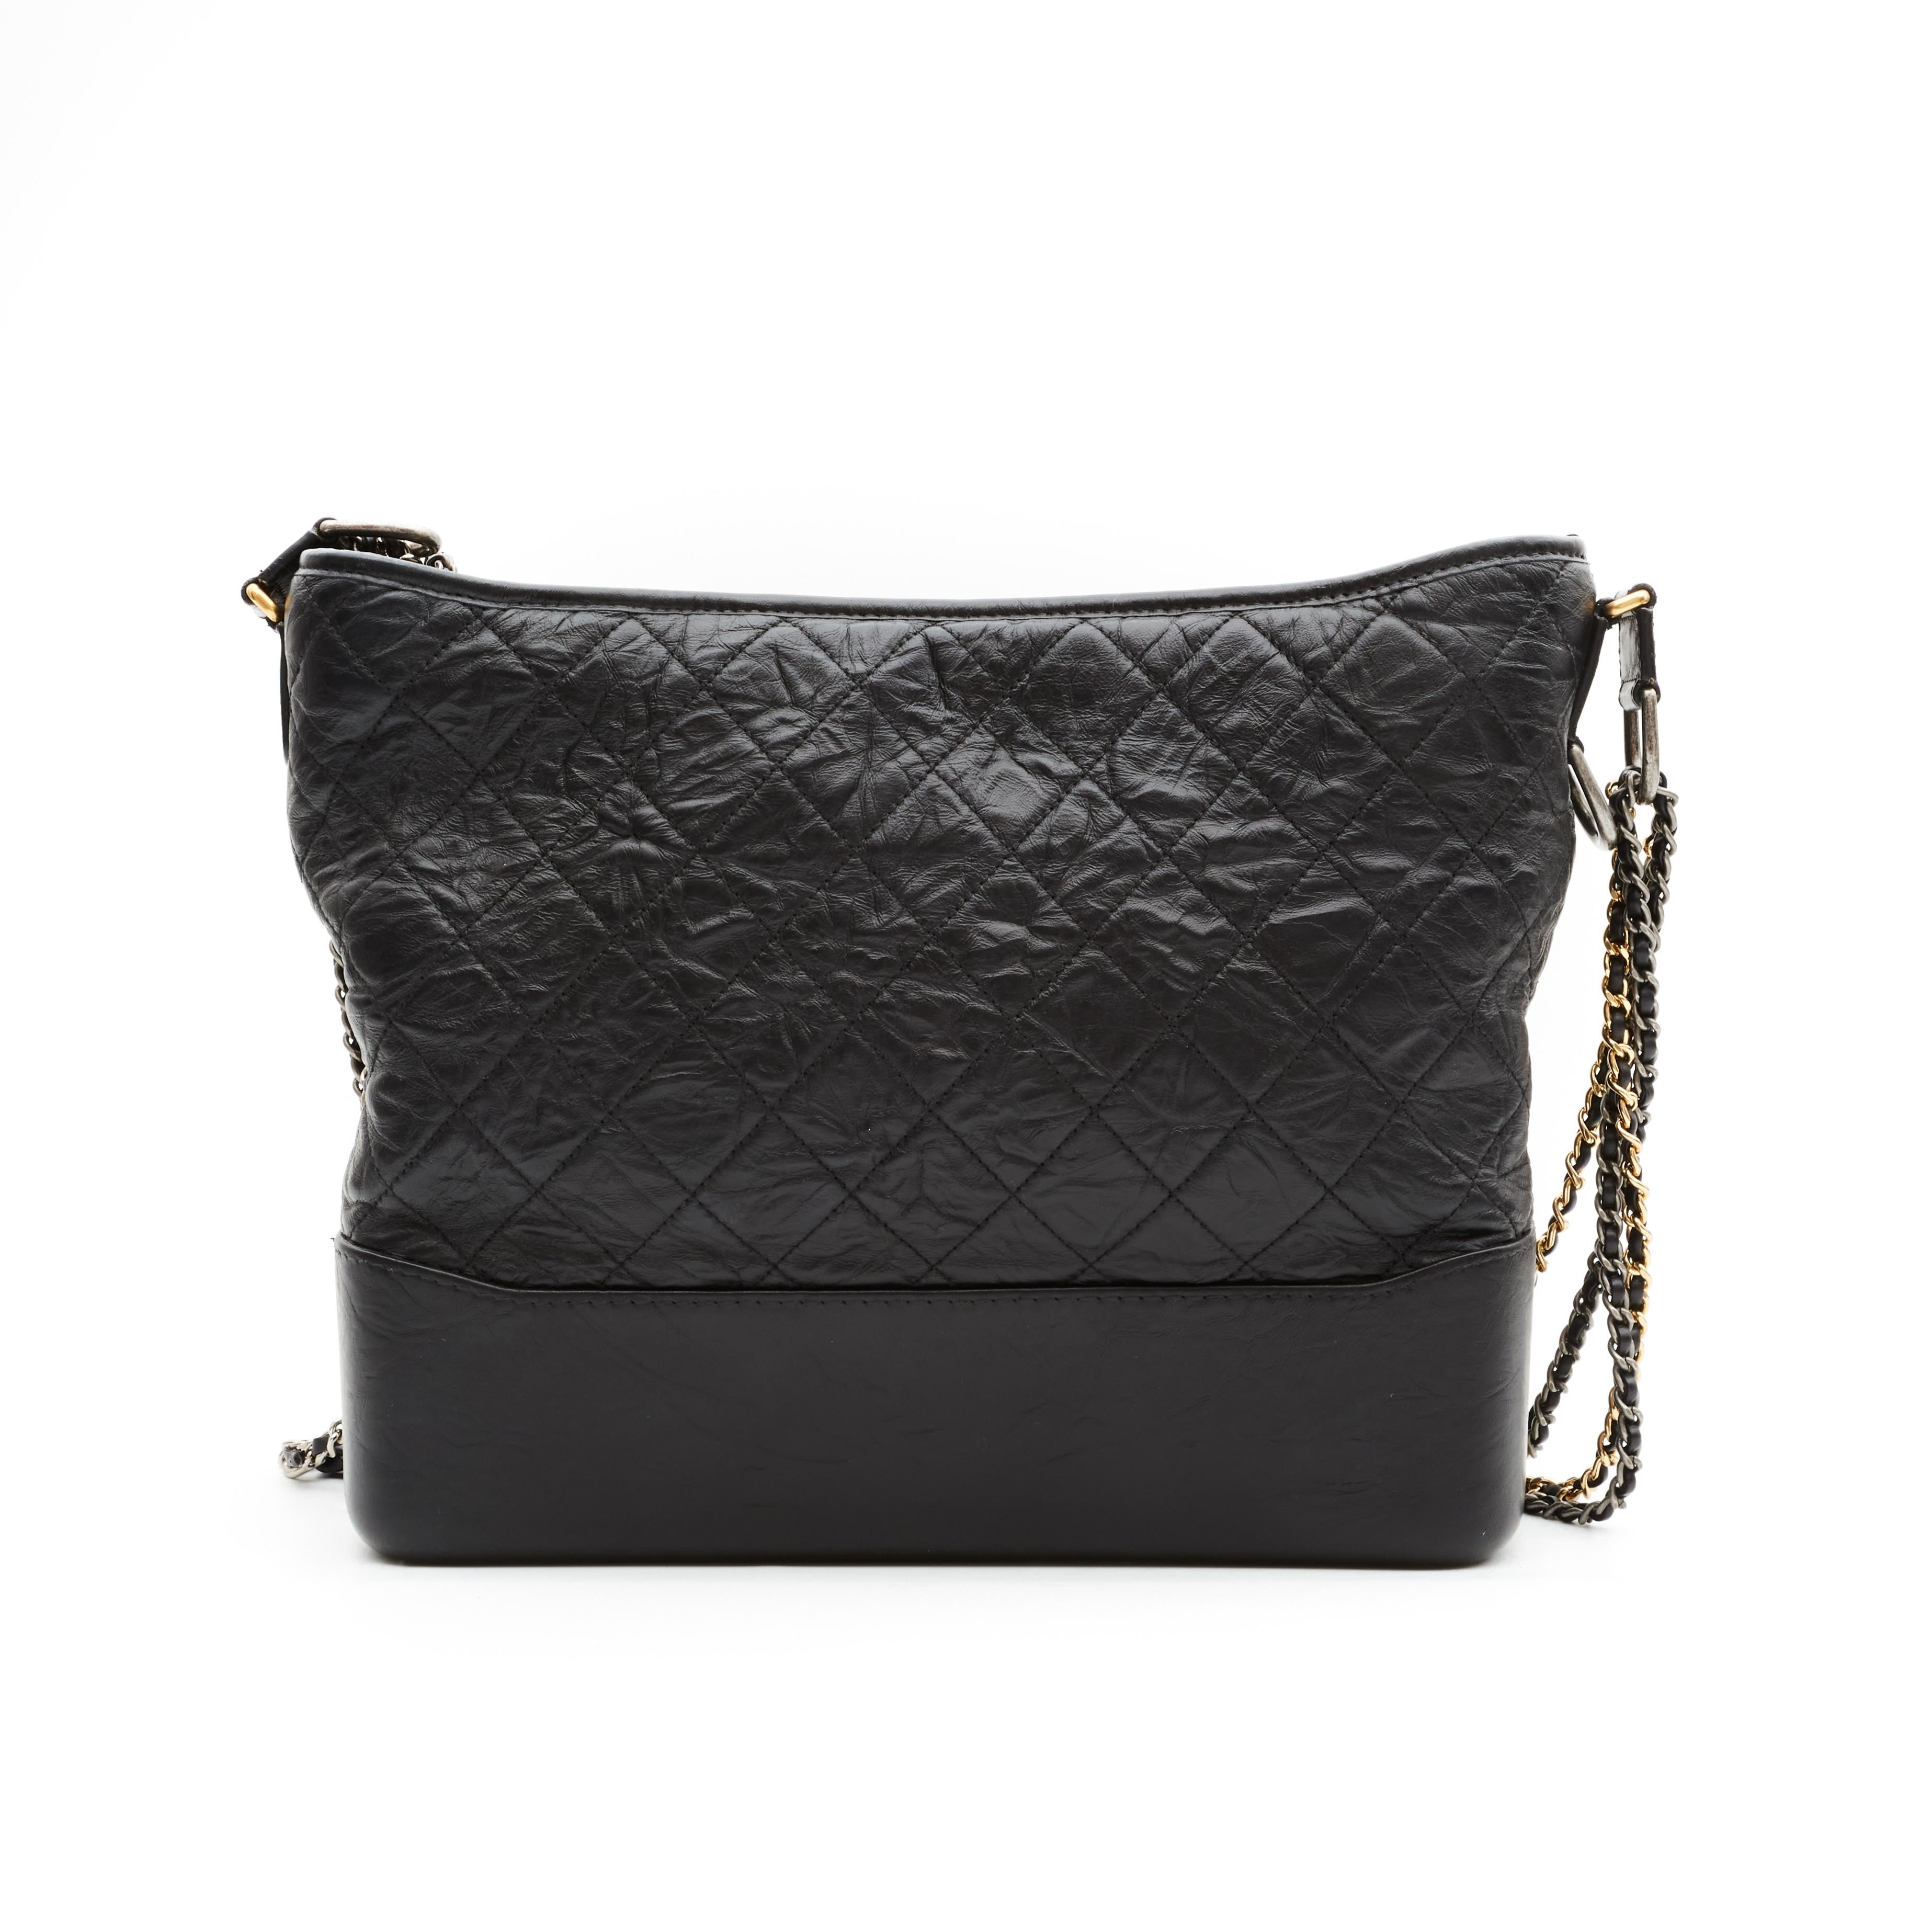 From the Spring 2017 collection, this current Gabrielle Hobo Bag is part of Chanel's new 'Gabrielle' line. This hobo bag features a sturdy base that provides structure for the quilted leather sides, a unique dual chain strap interlaced with leather,